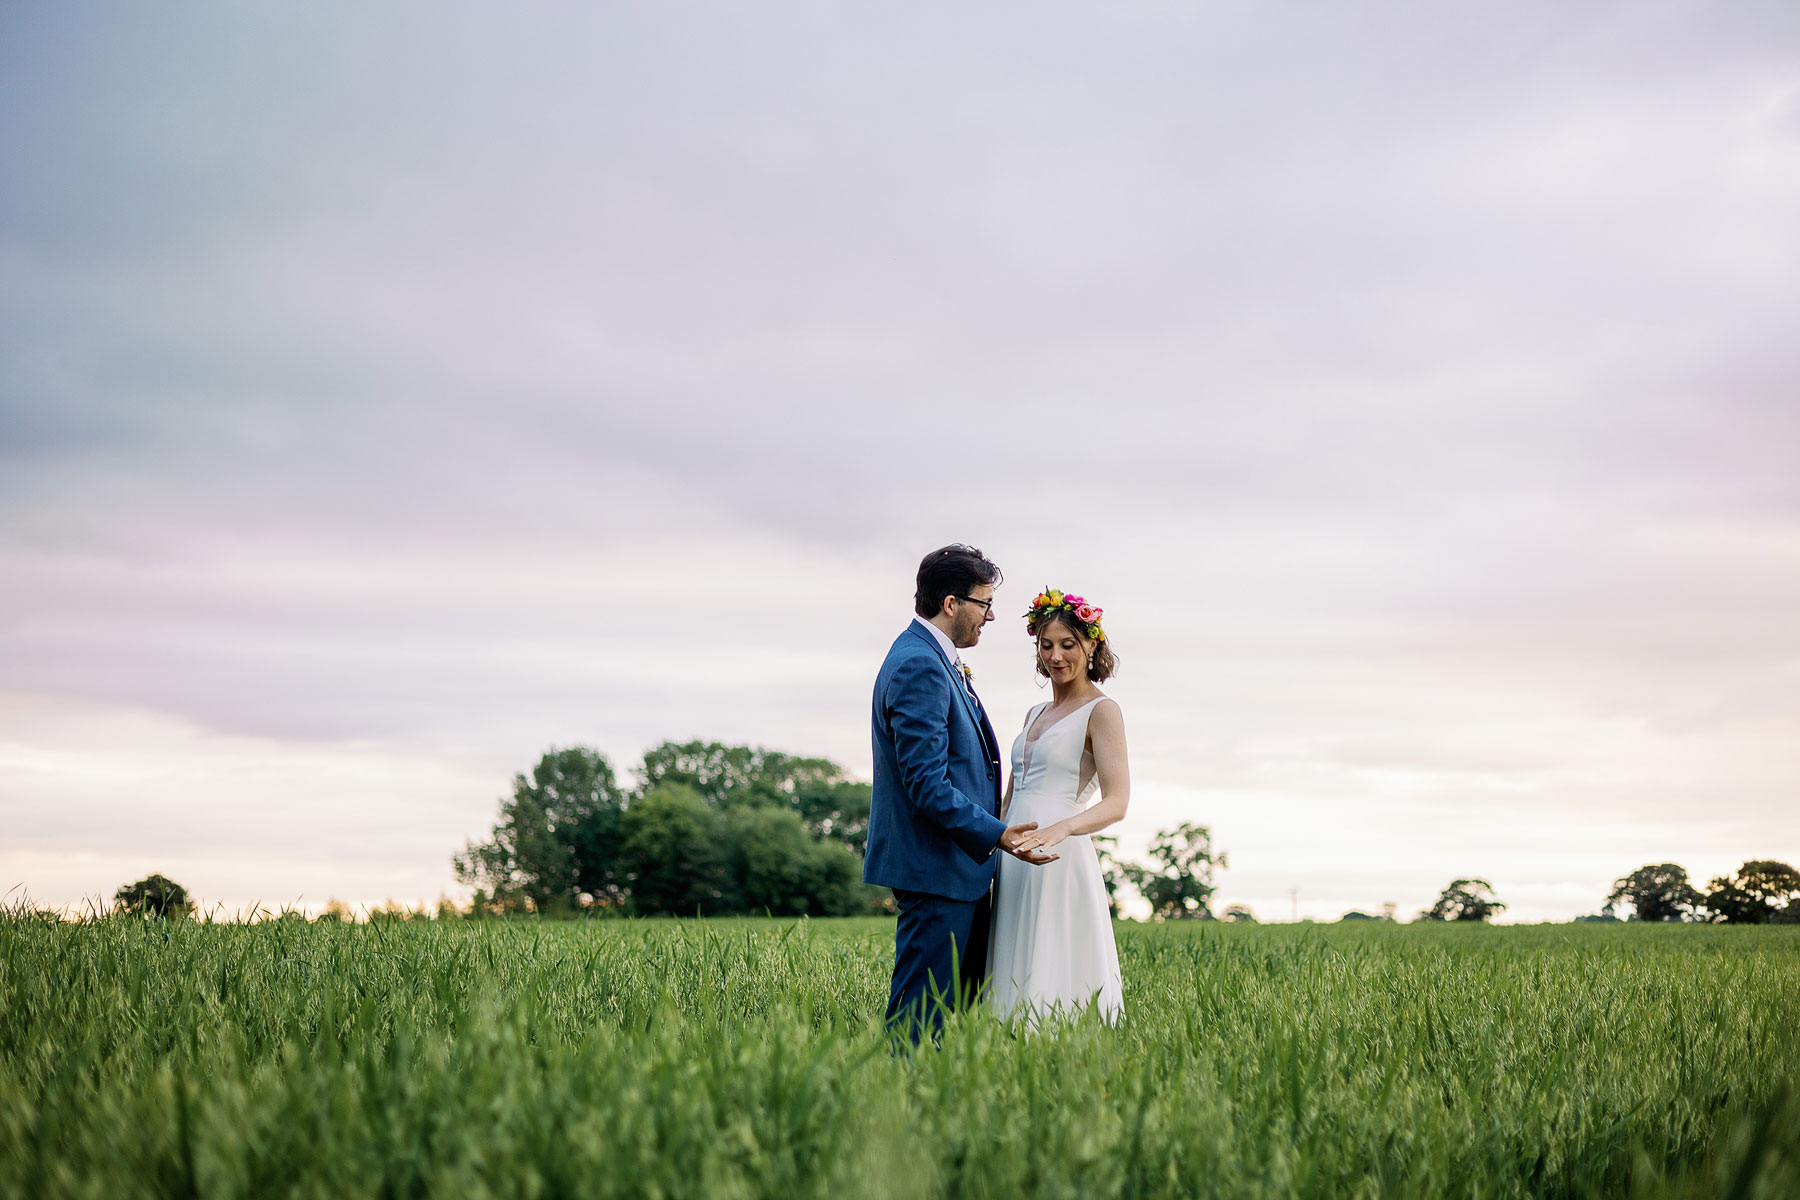 creative and magical wedding photography in york